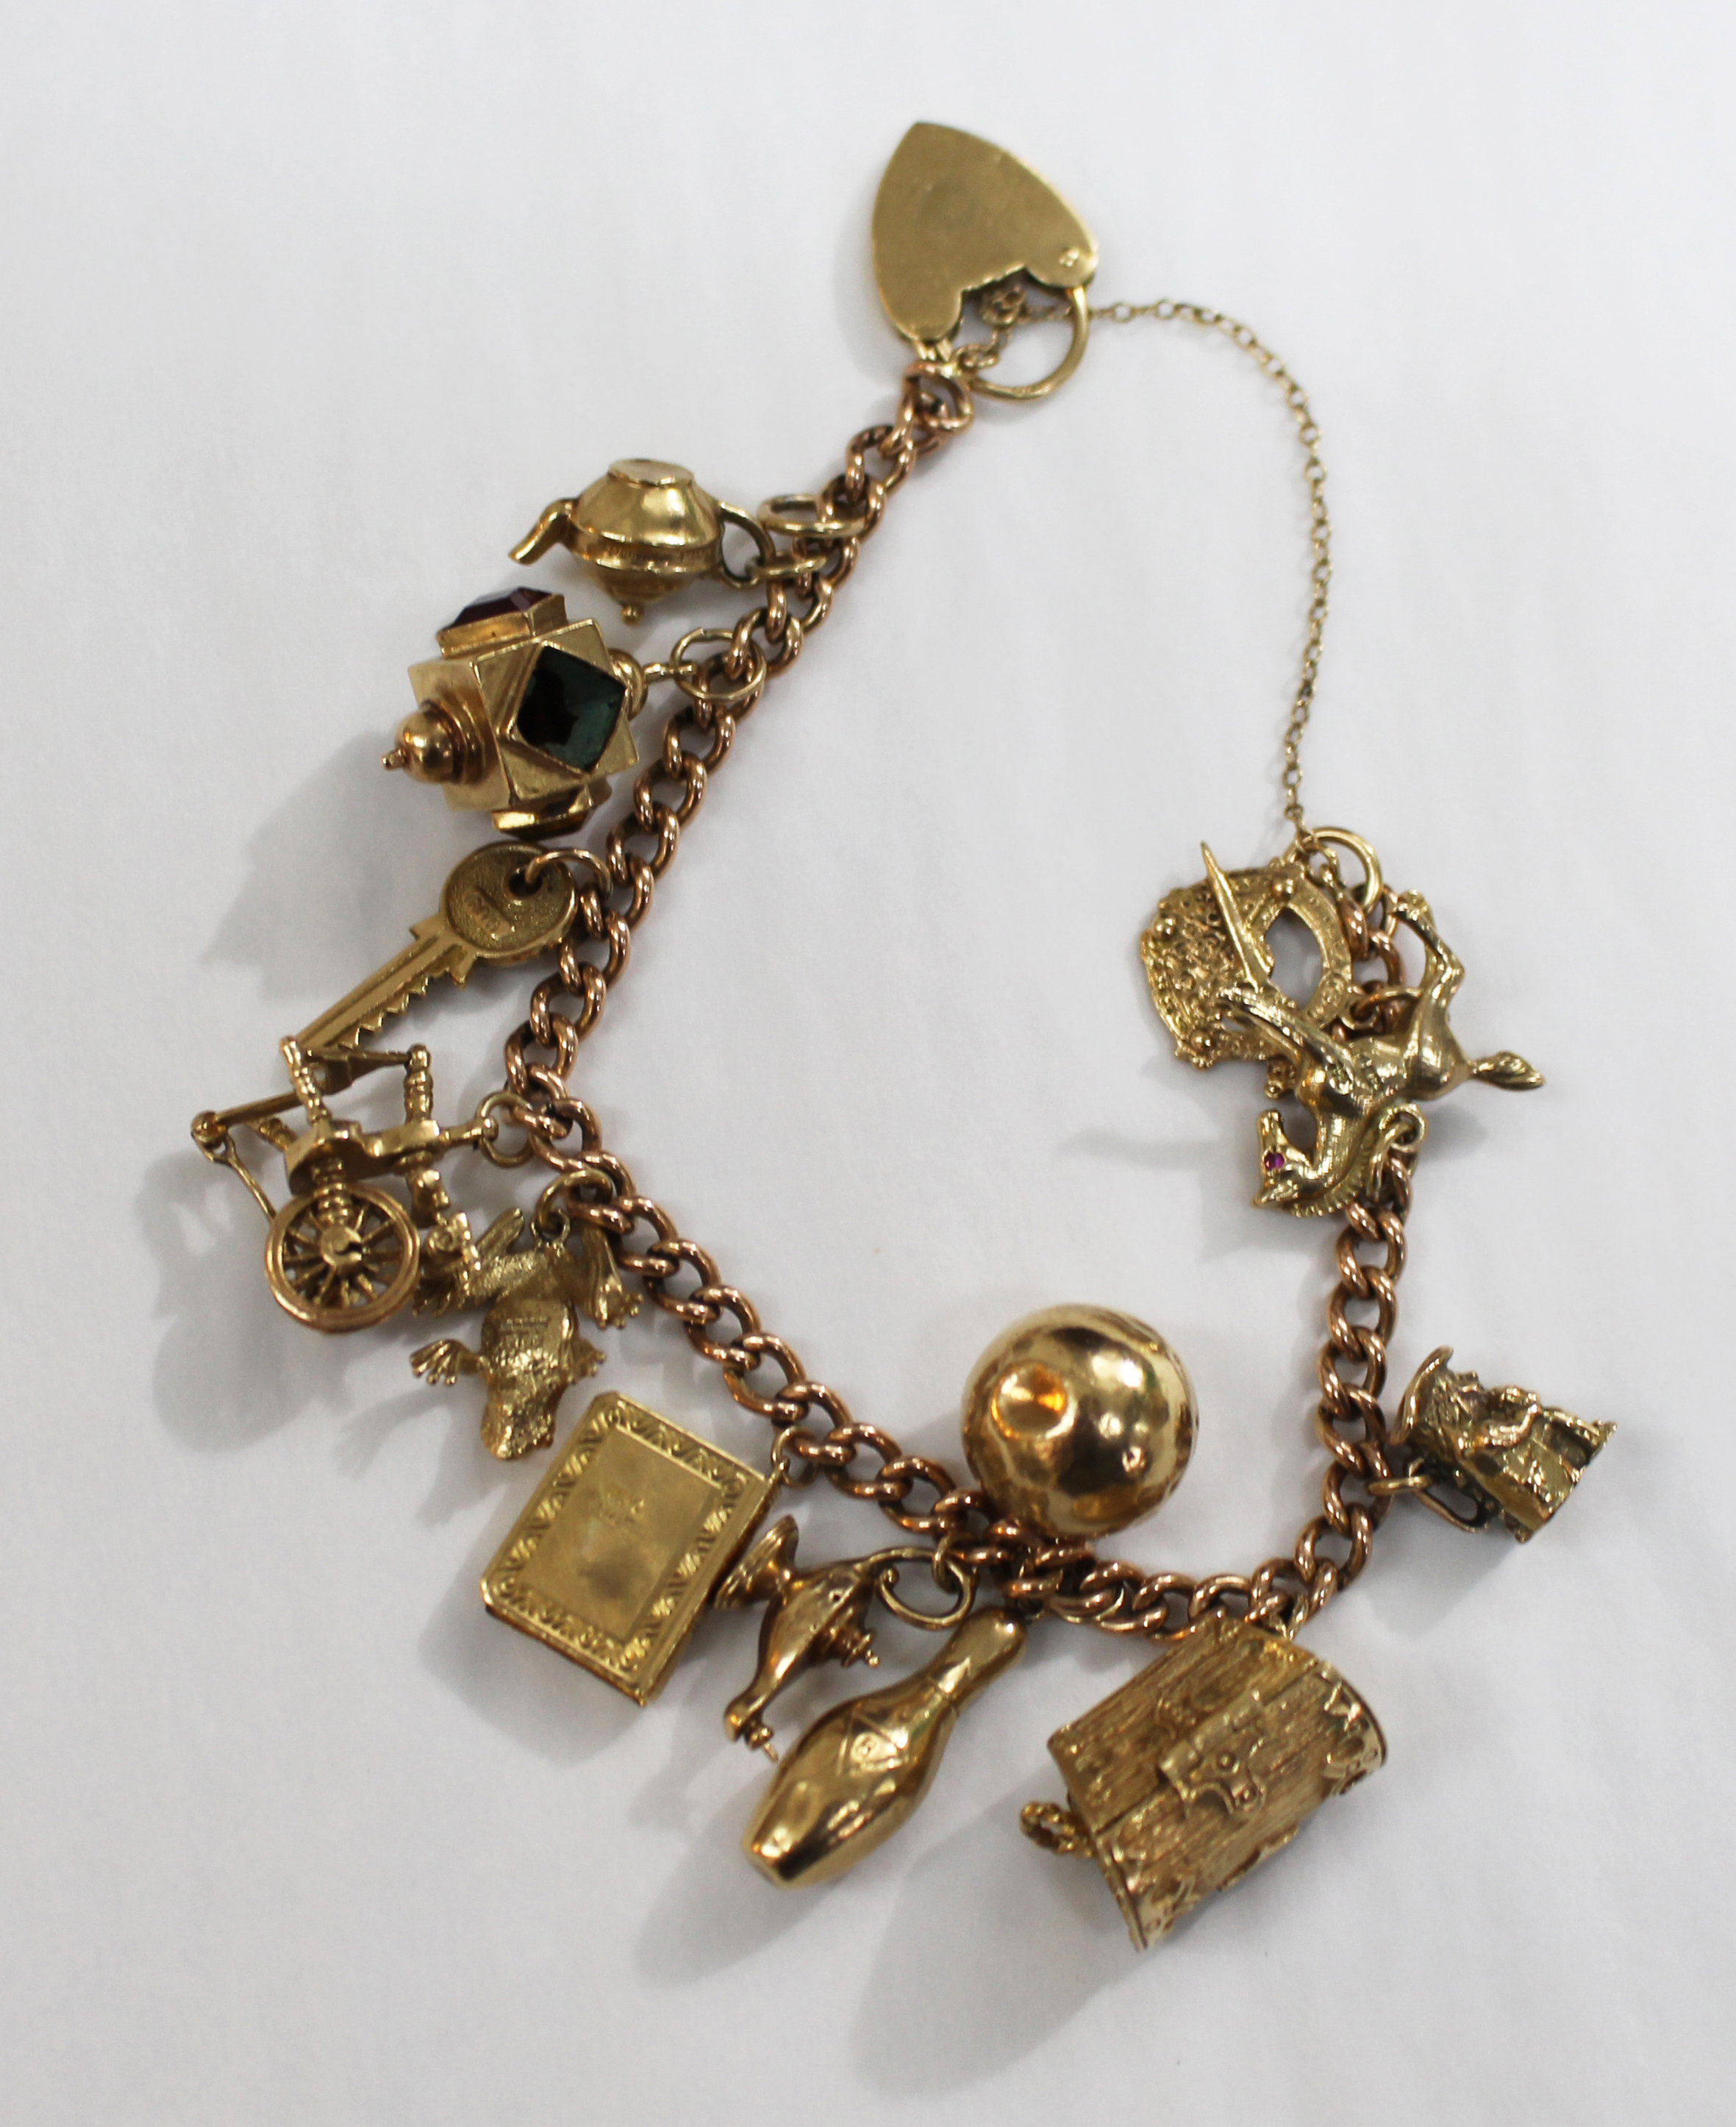 9ct Gold Vintage Charm Bracelet with 14 Charms - Image 5 of 10